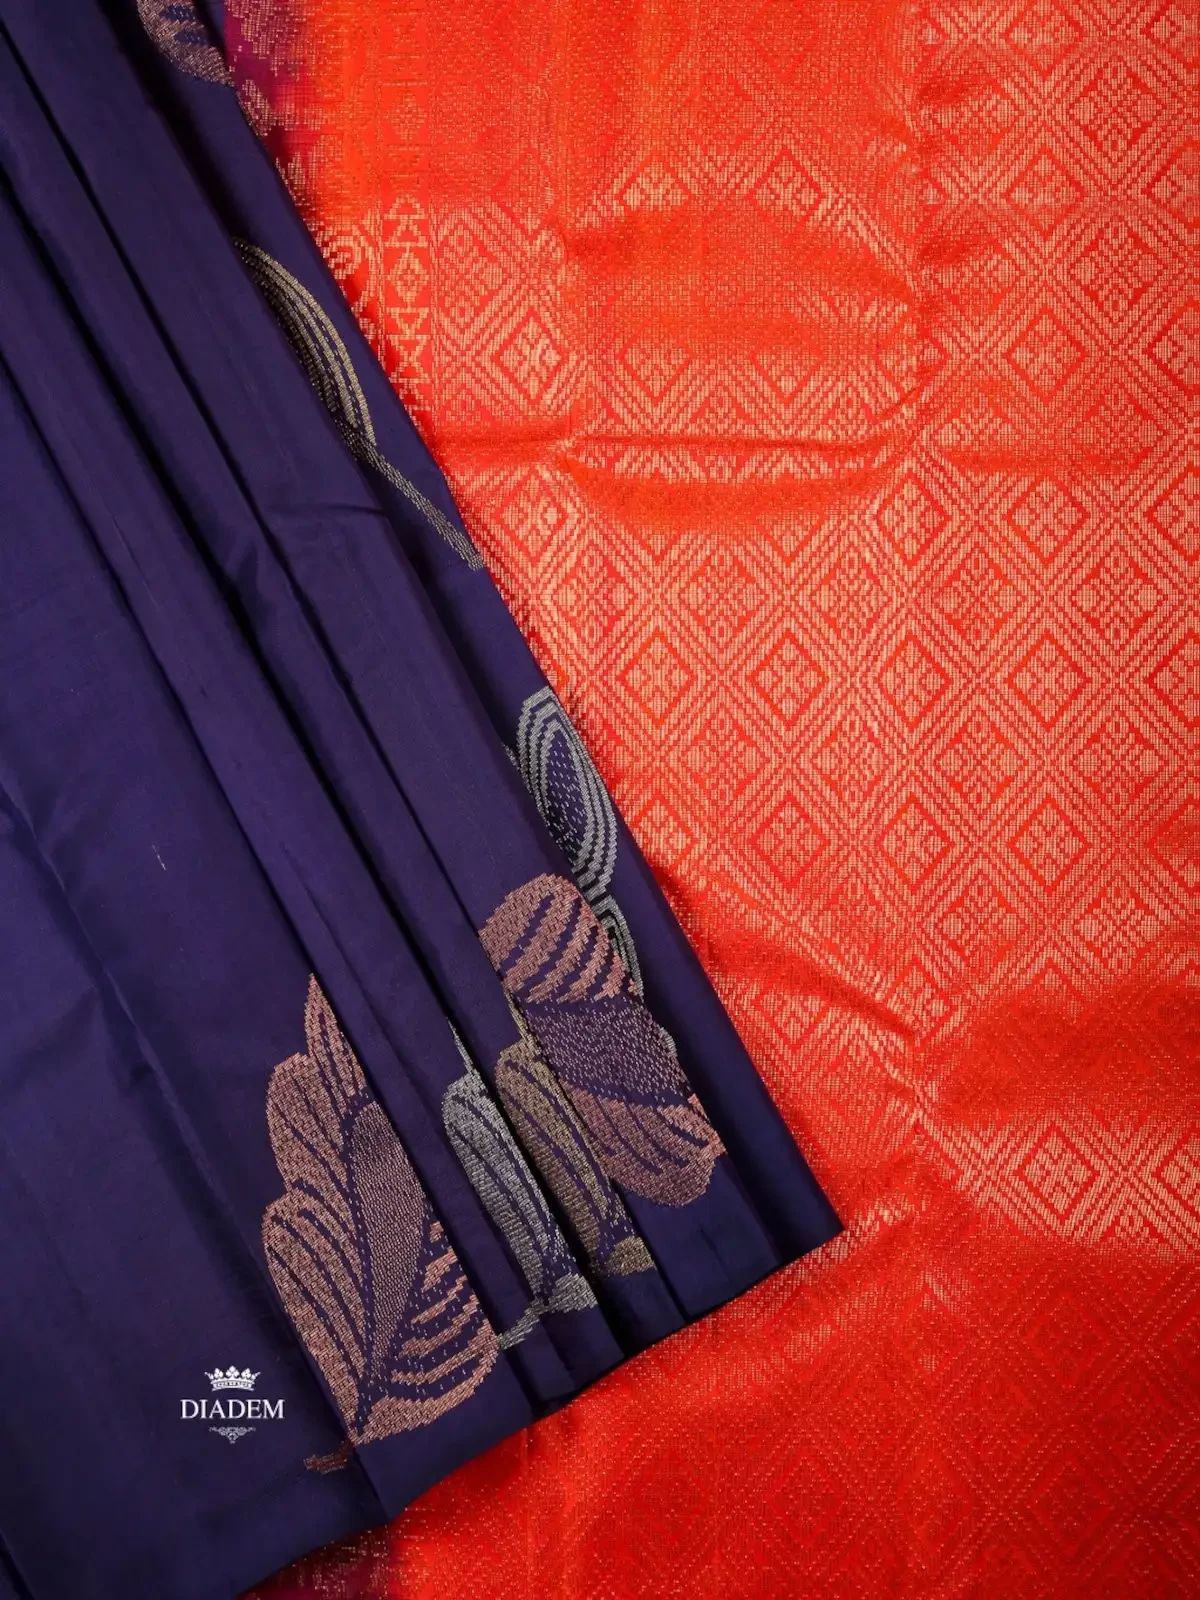 Dark Navy Blue Pure Kanchipuram Silk Saree With Leaf Motif On The Body And Without Border